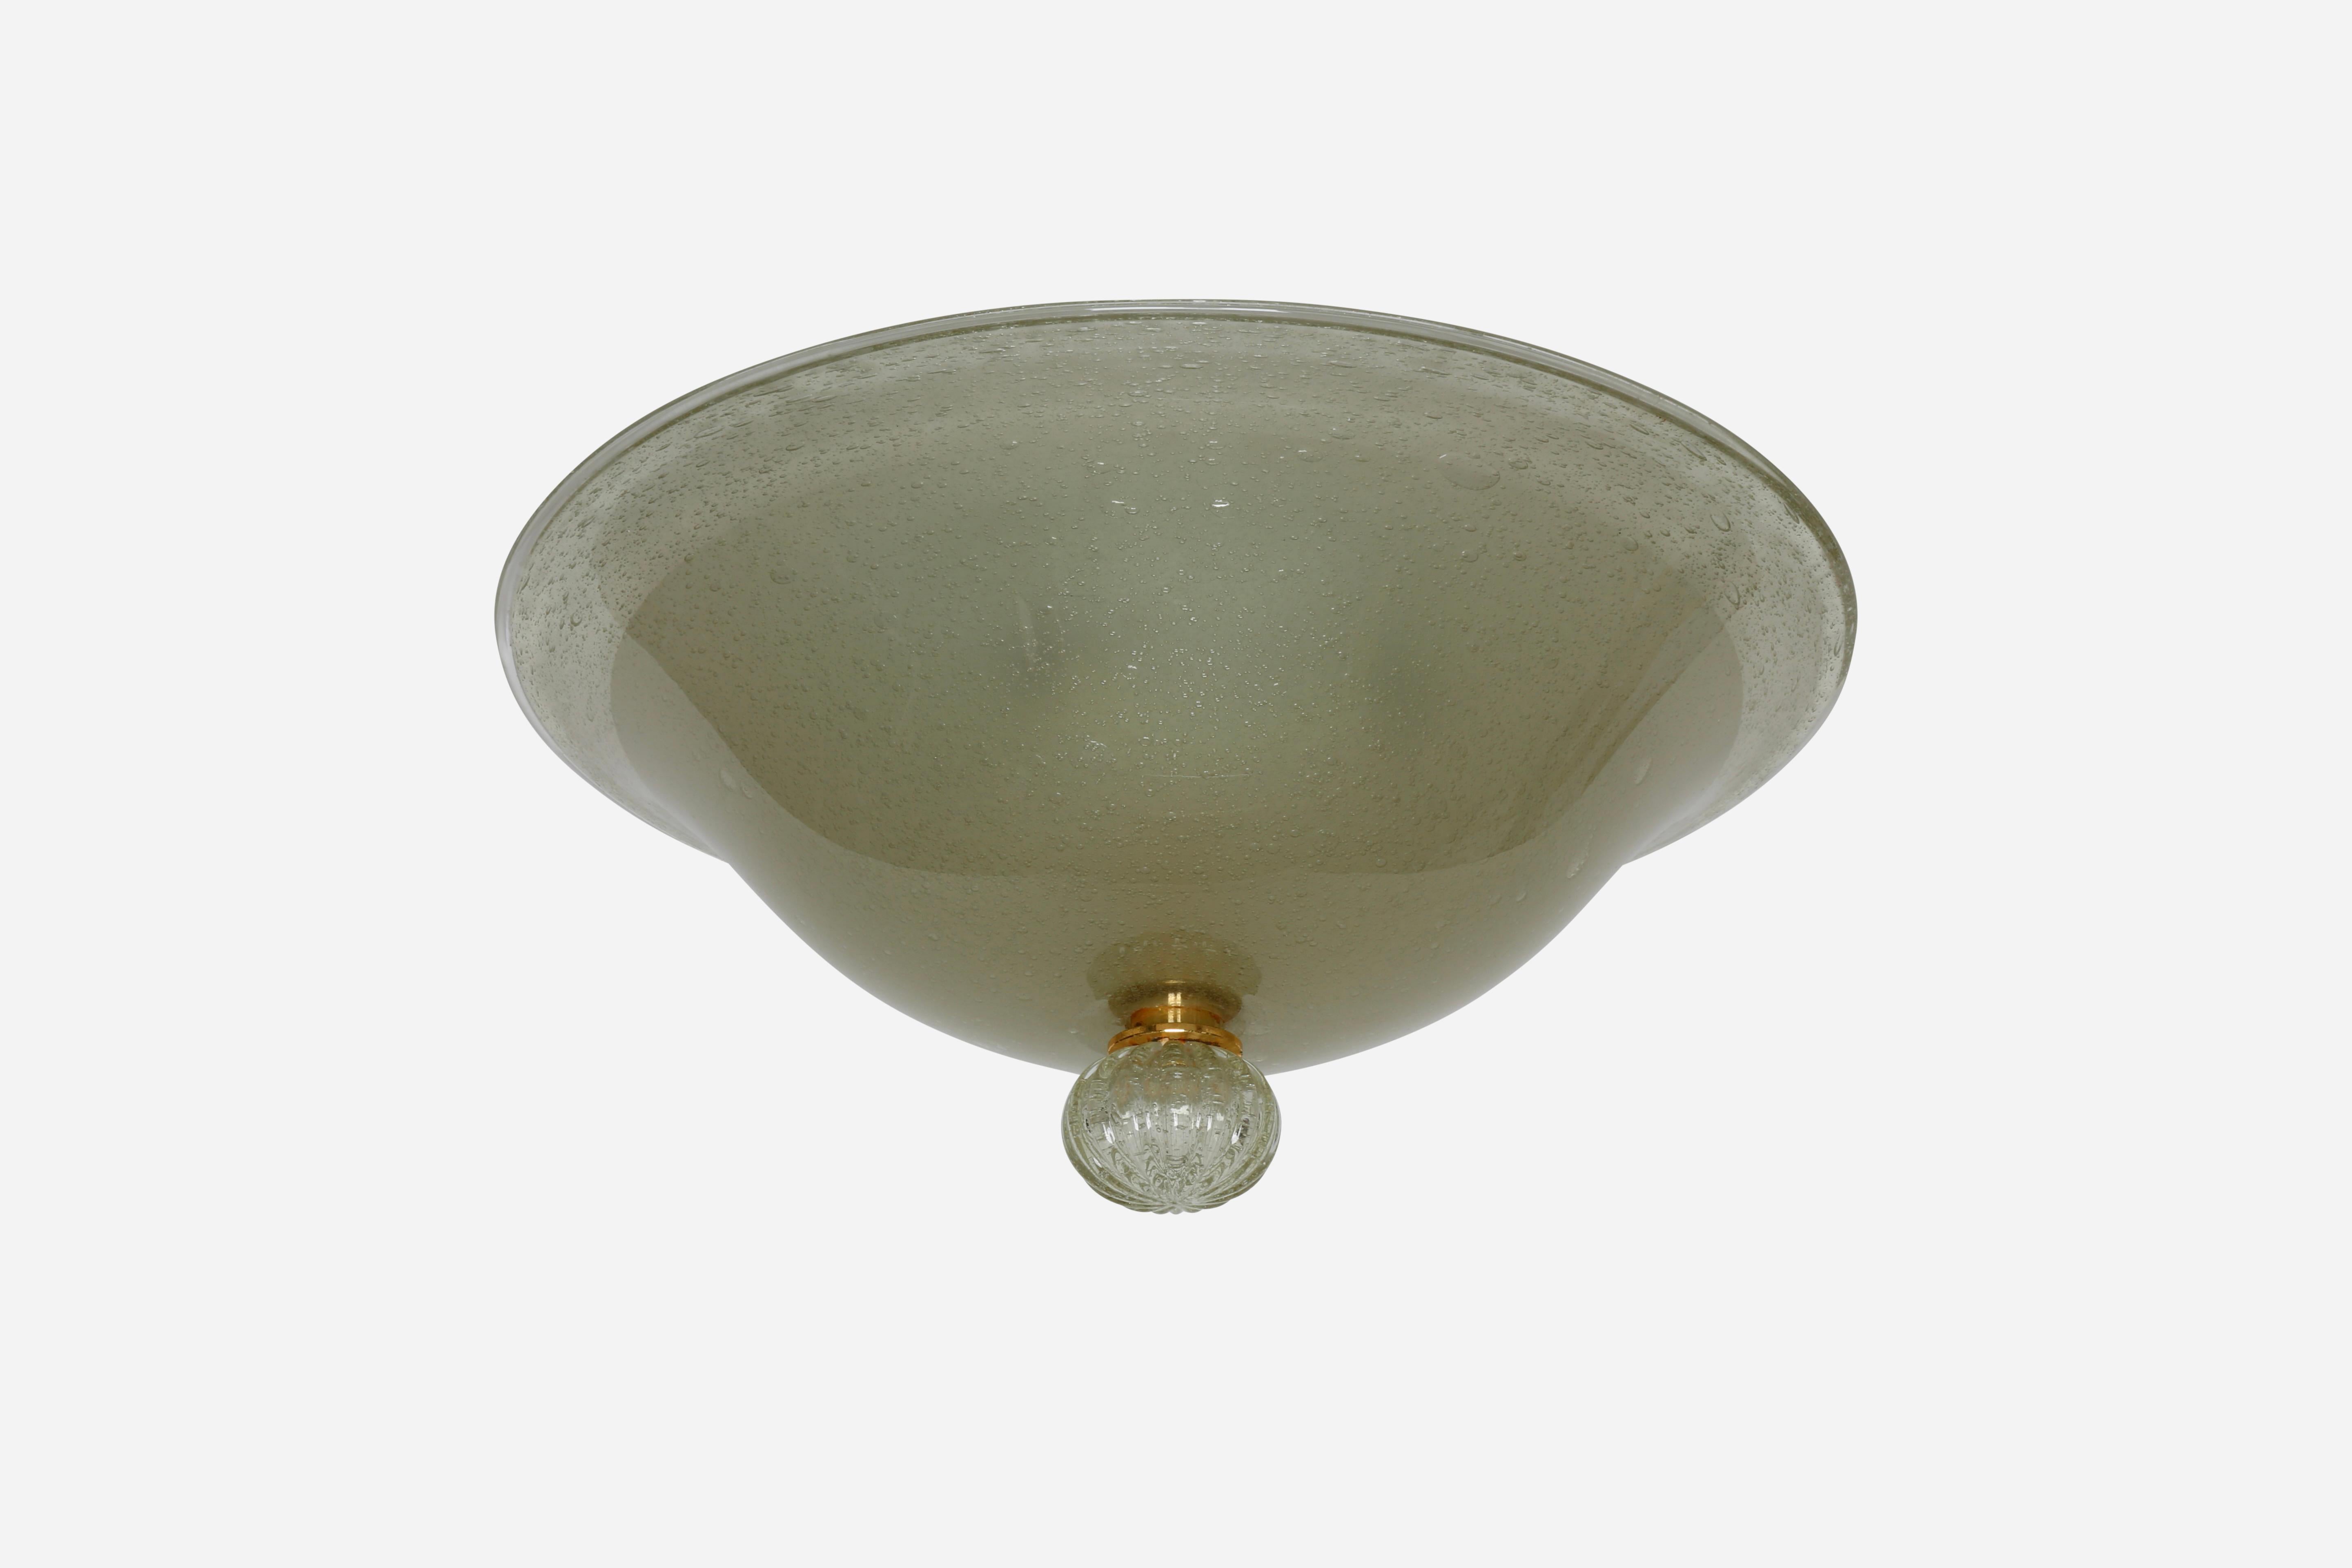 Murano glass flush mount ceiling light by Barovier & Toso.
Designed and made in Italy in 1970s.
Hand blown bullicante glass.
Four candelabra bulbs. 
Complimentary US rewiring upon request.